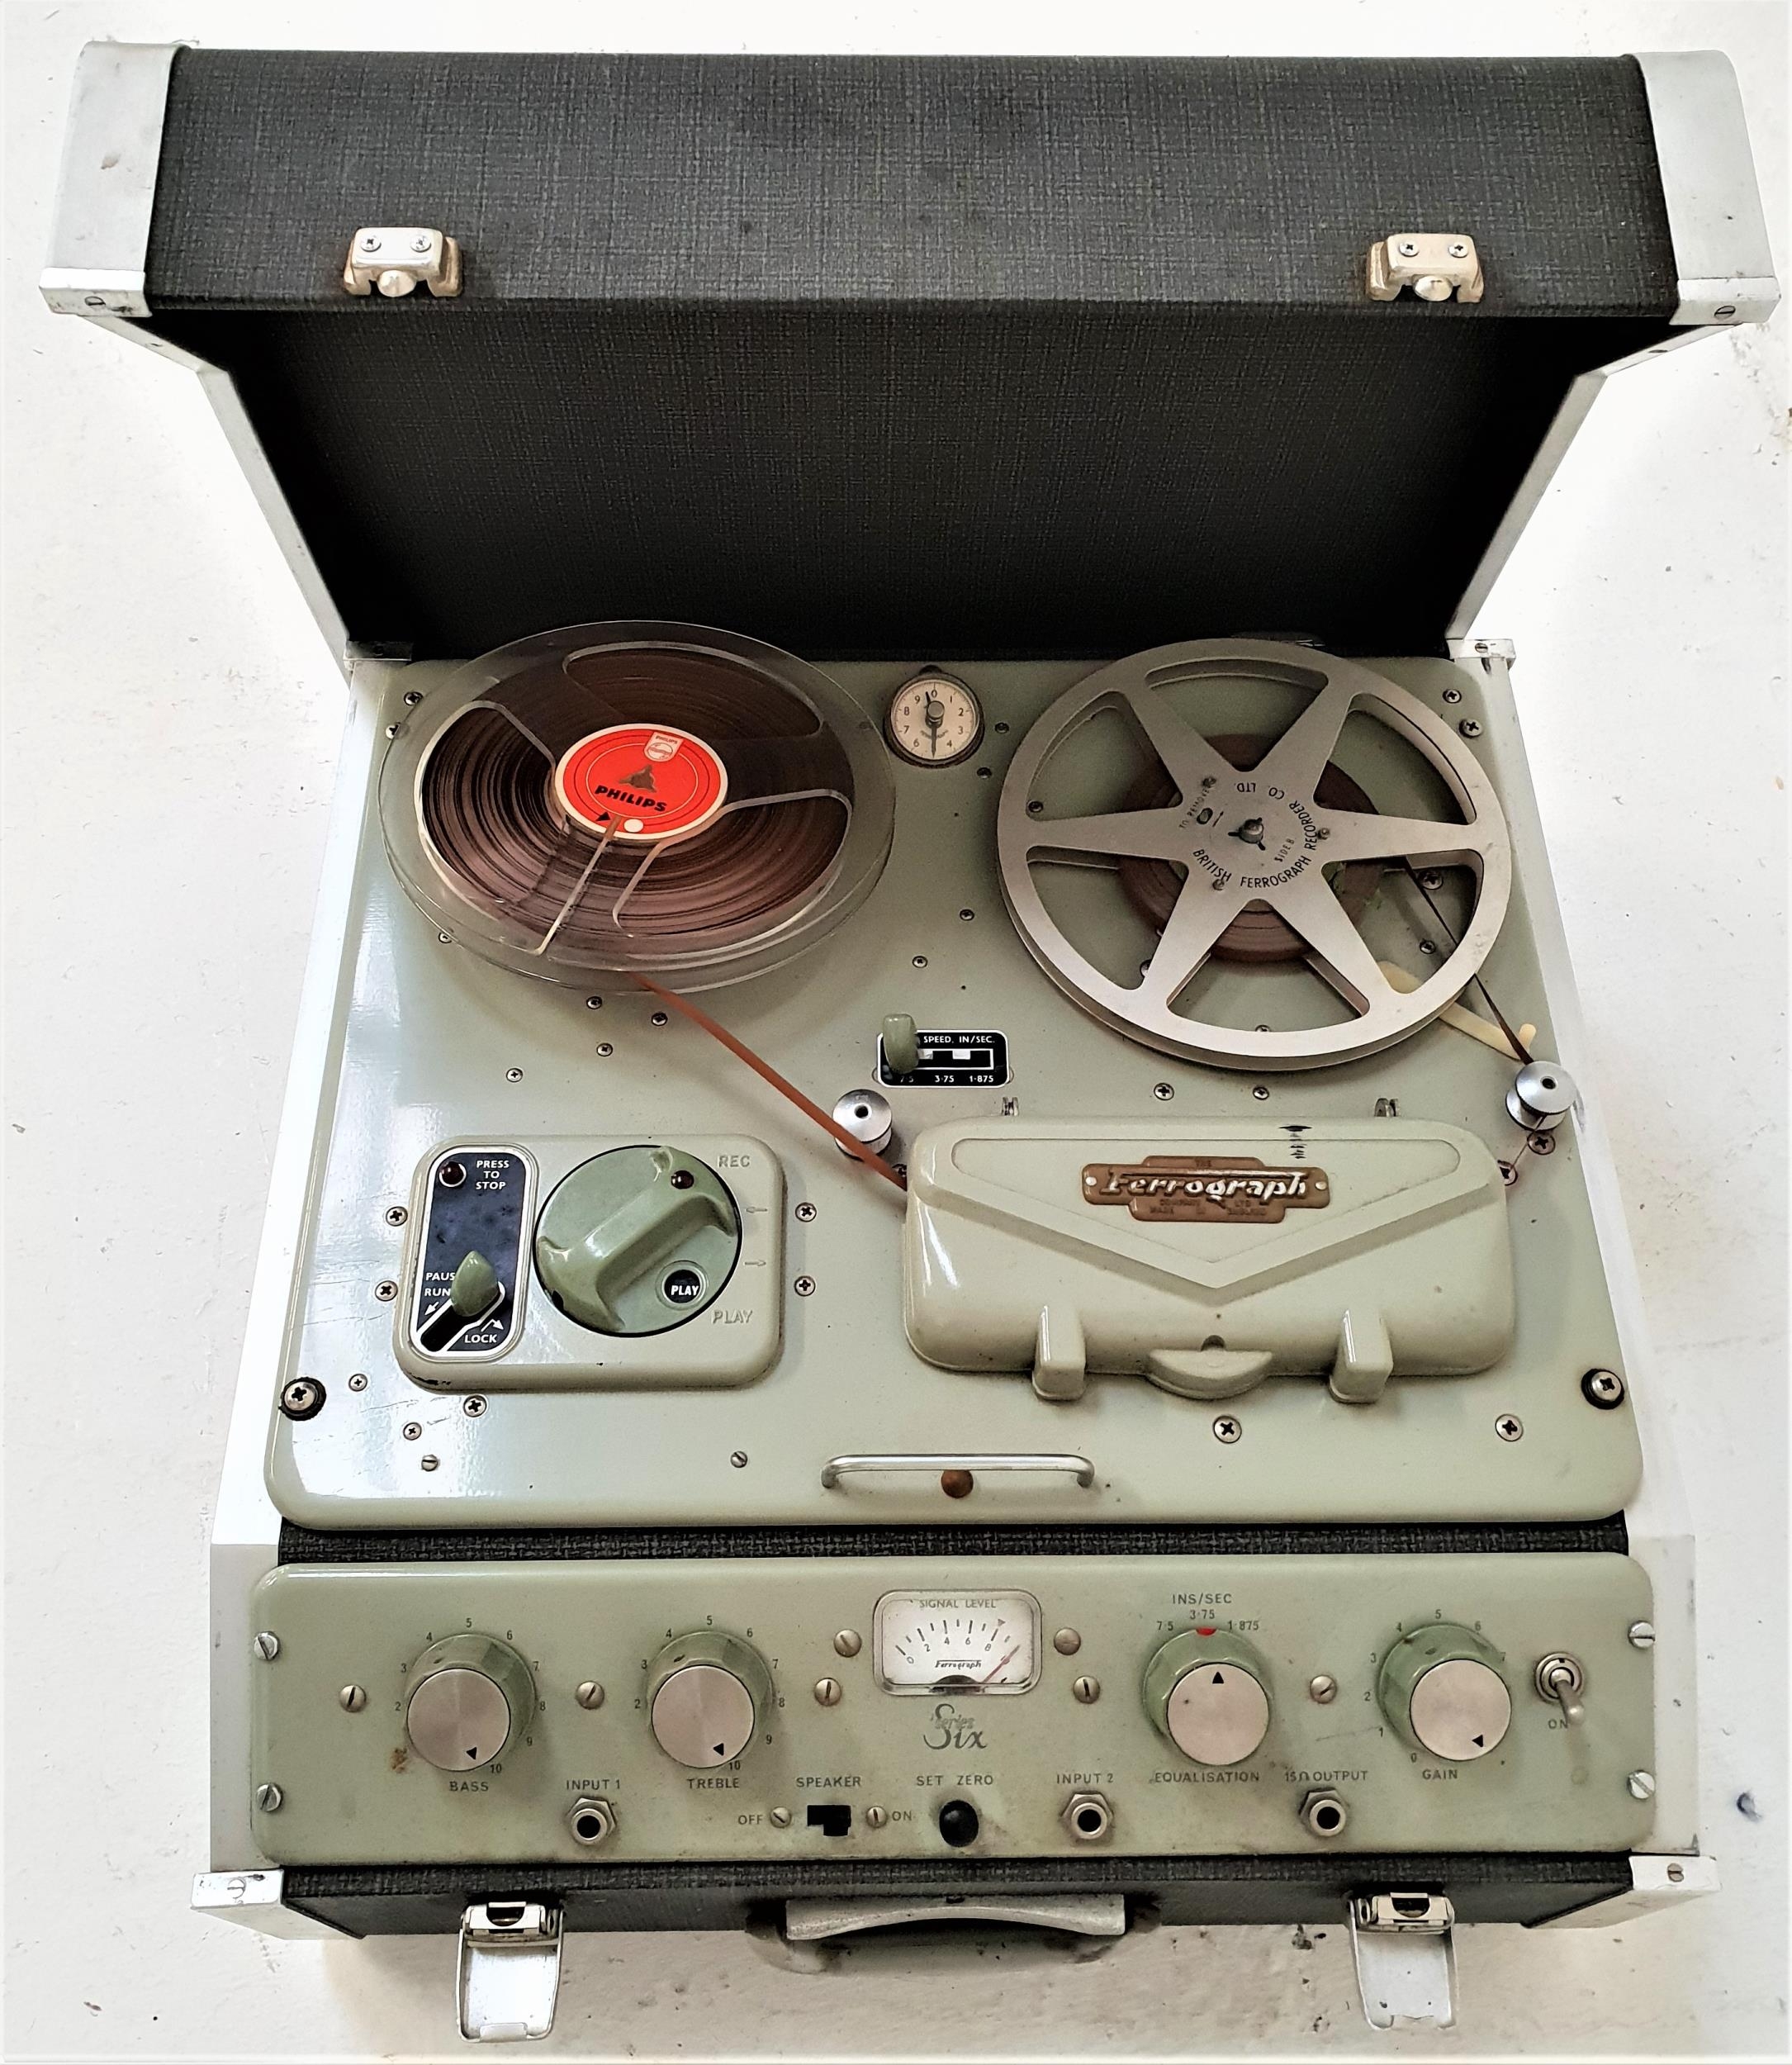 FERROGRAPH REEL TO REEL RECORDER series six, with a microphone, and contained in a hard shell case